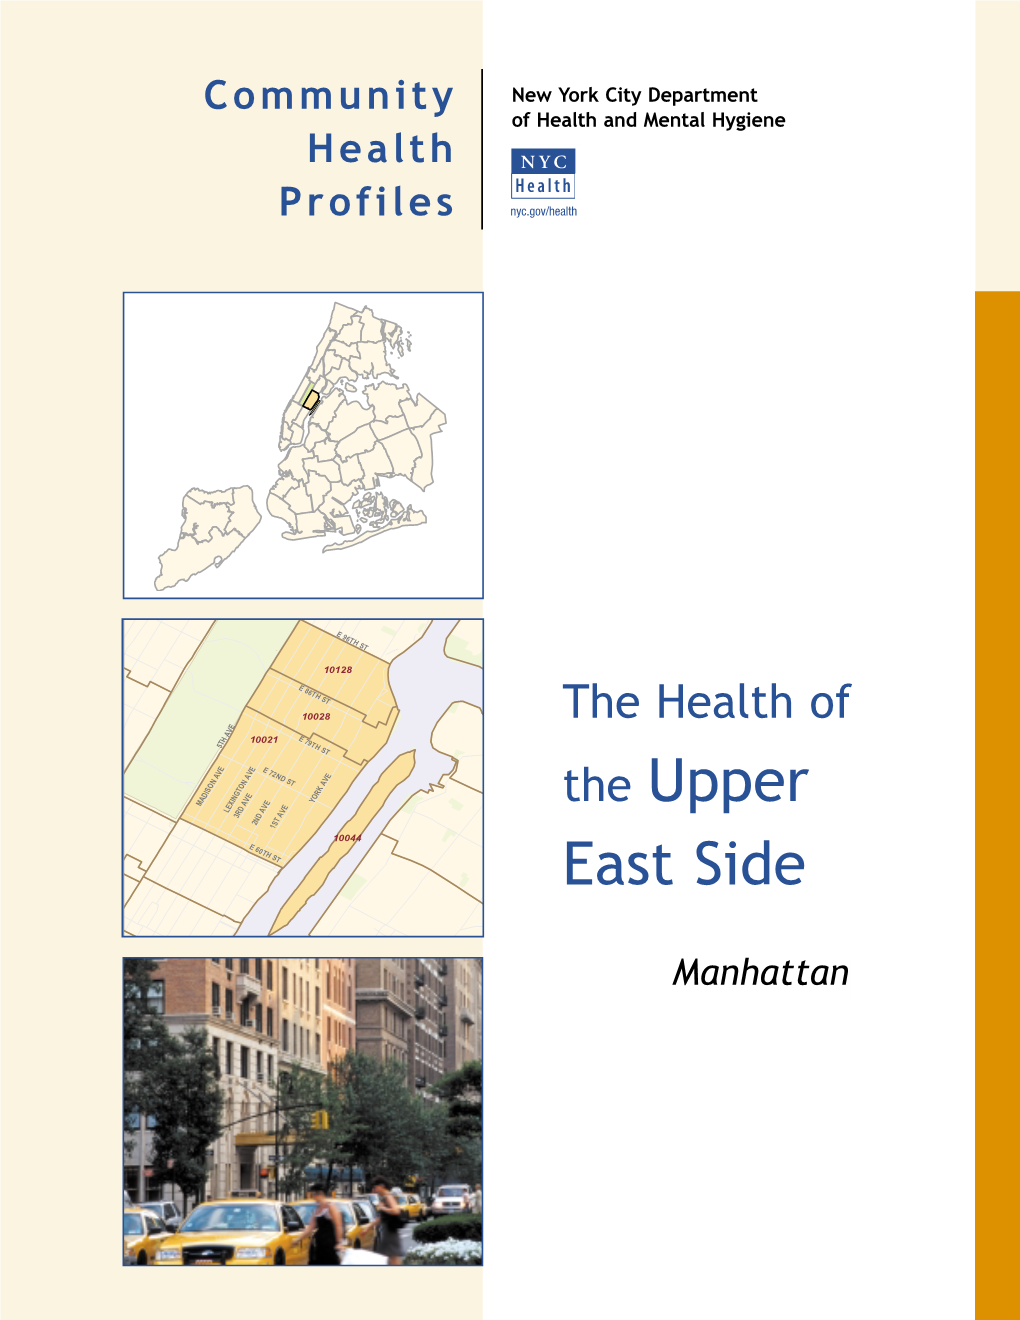 The Upper East Side, with a Special Focus on Preventable Causes of Illness and Death